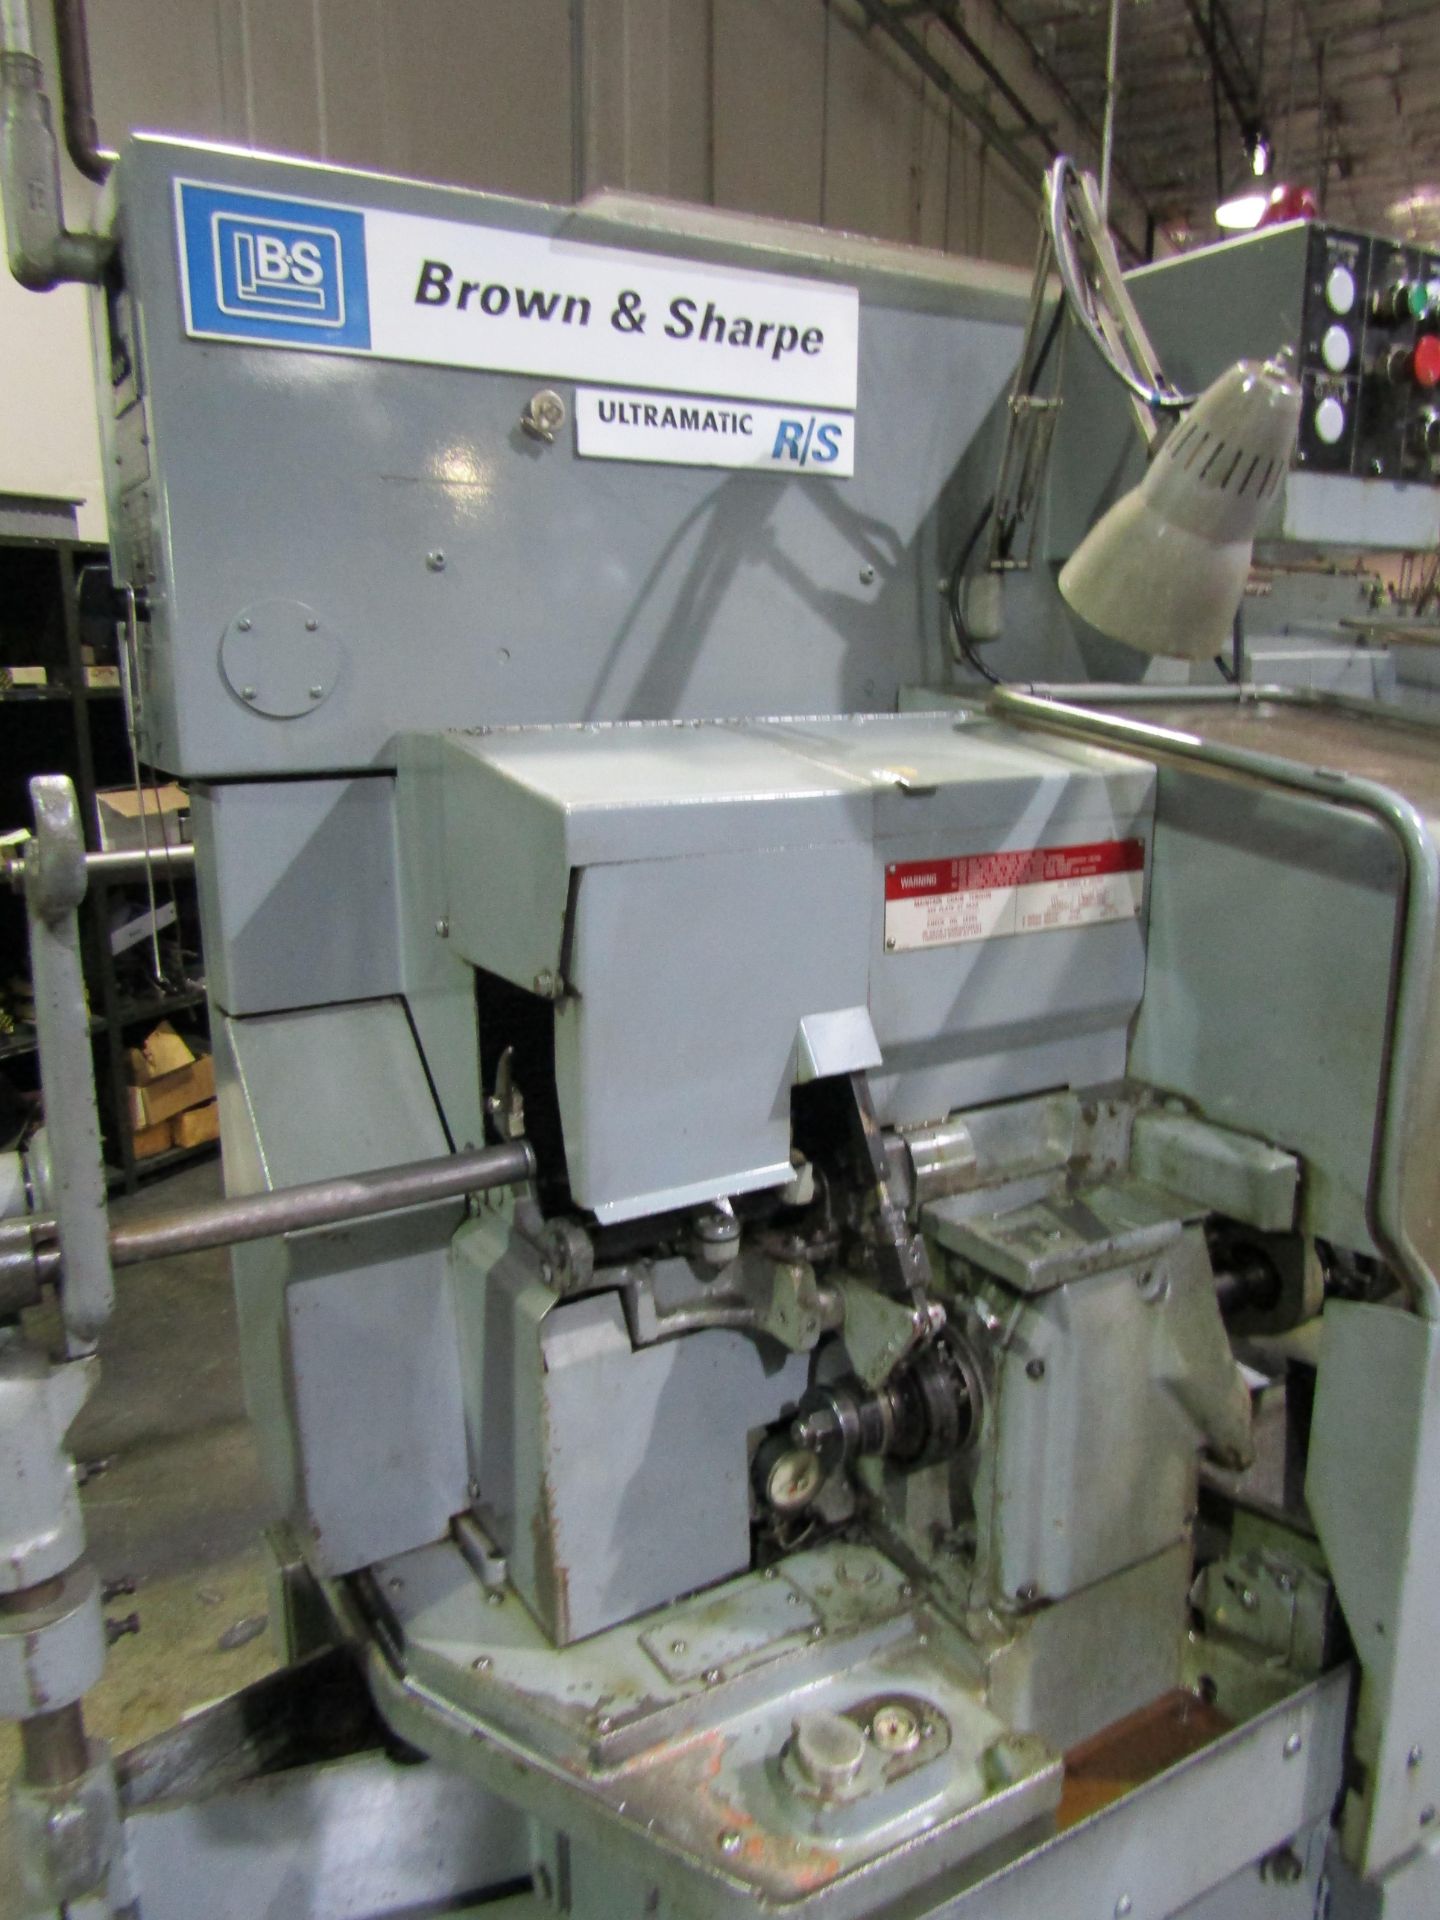 BROWNE & SHARPE AUTOMATIC LATHE SCREW MACHINE, MODEL ULTRAMATIC R/S, SERIAL 542-00-9798. LOT TO - Image 6 of 12